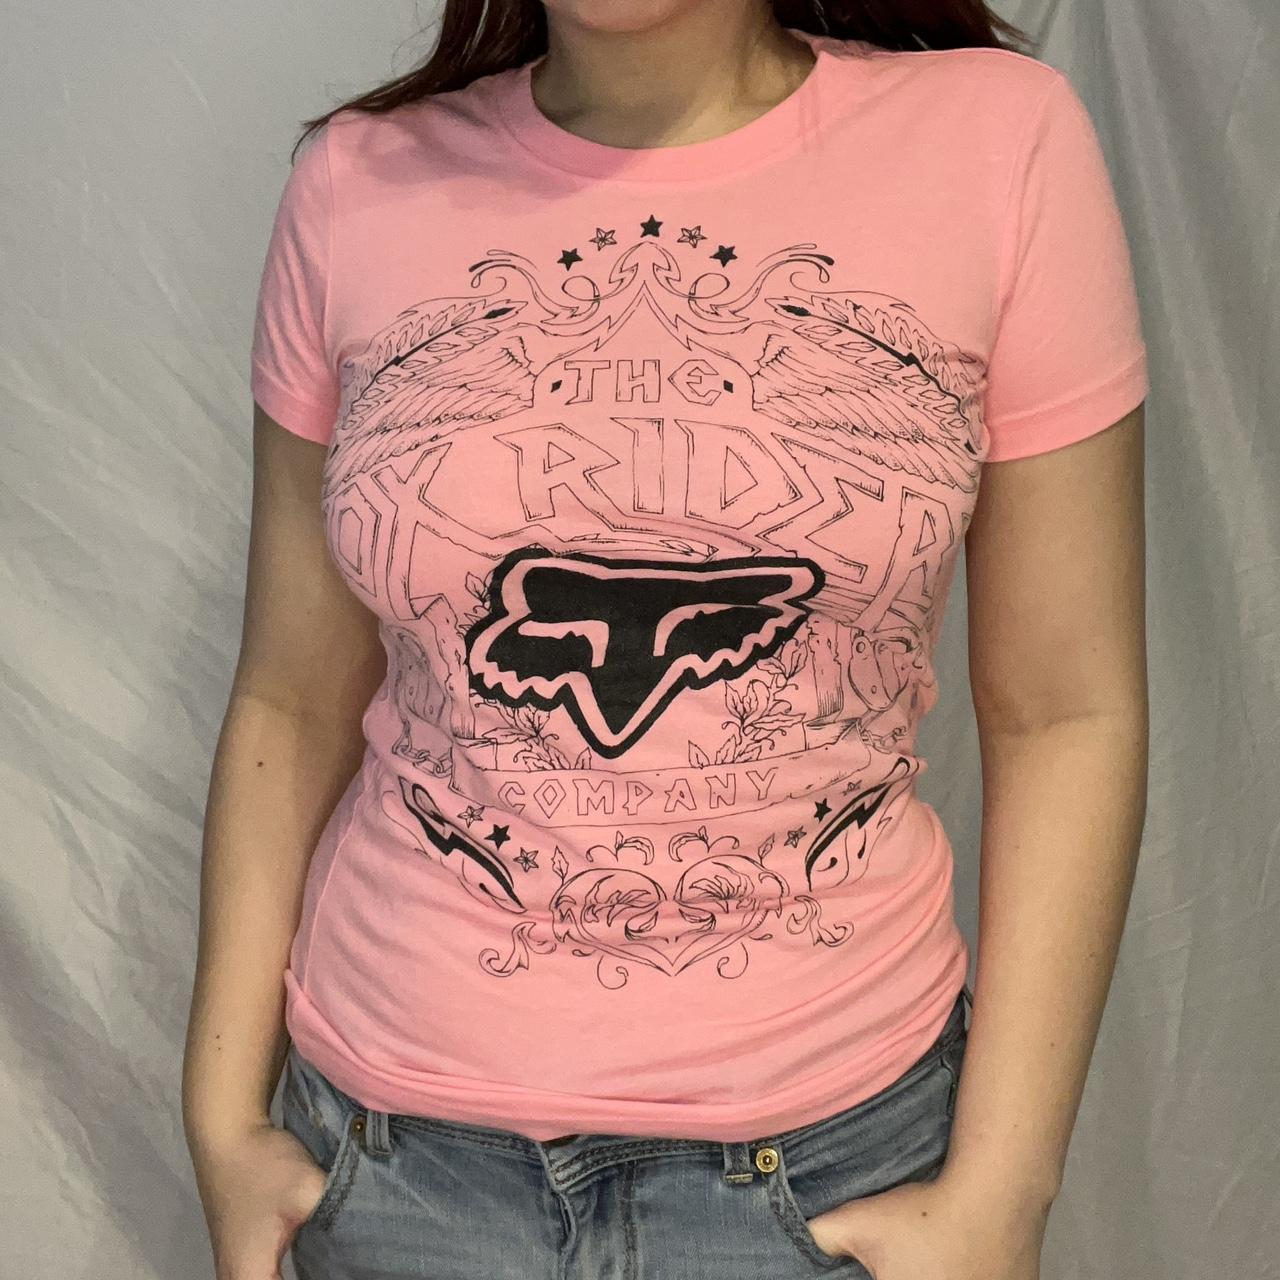 Women's Pink and Black T-shirt (2)